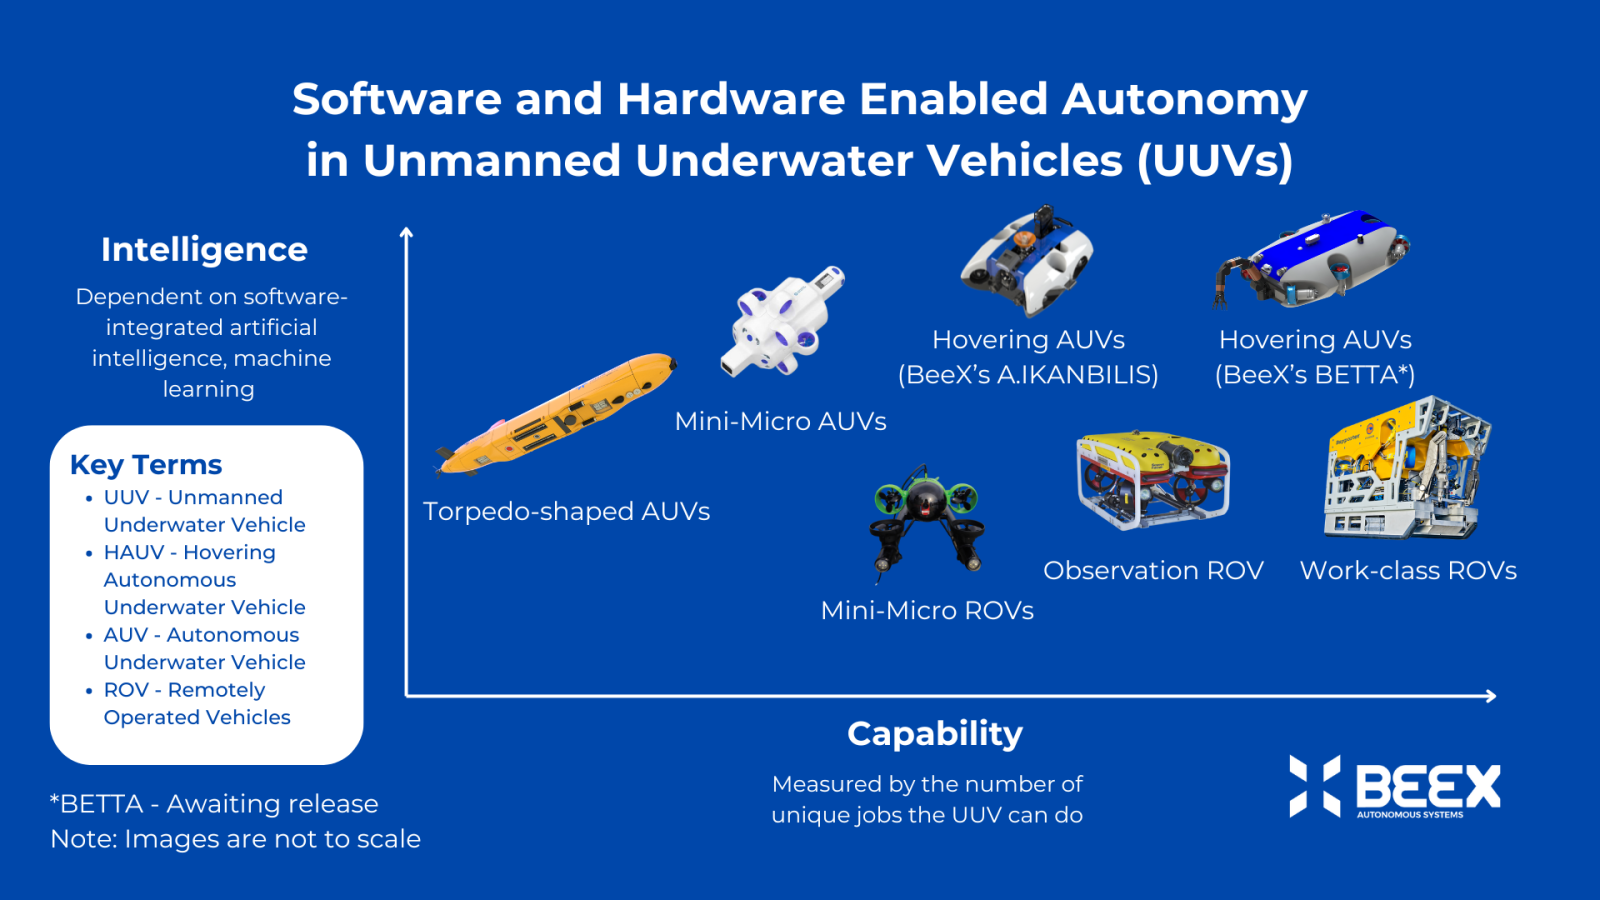 Software and Hardware Enabled Autonomy in Unmanned Underwater Vehicles (UUVs) (2)